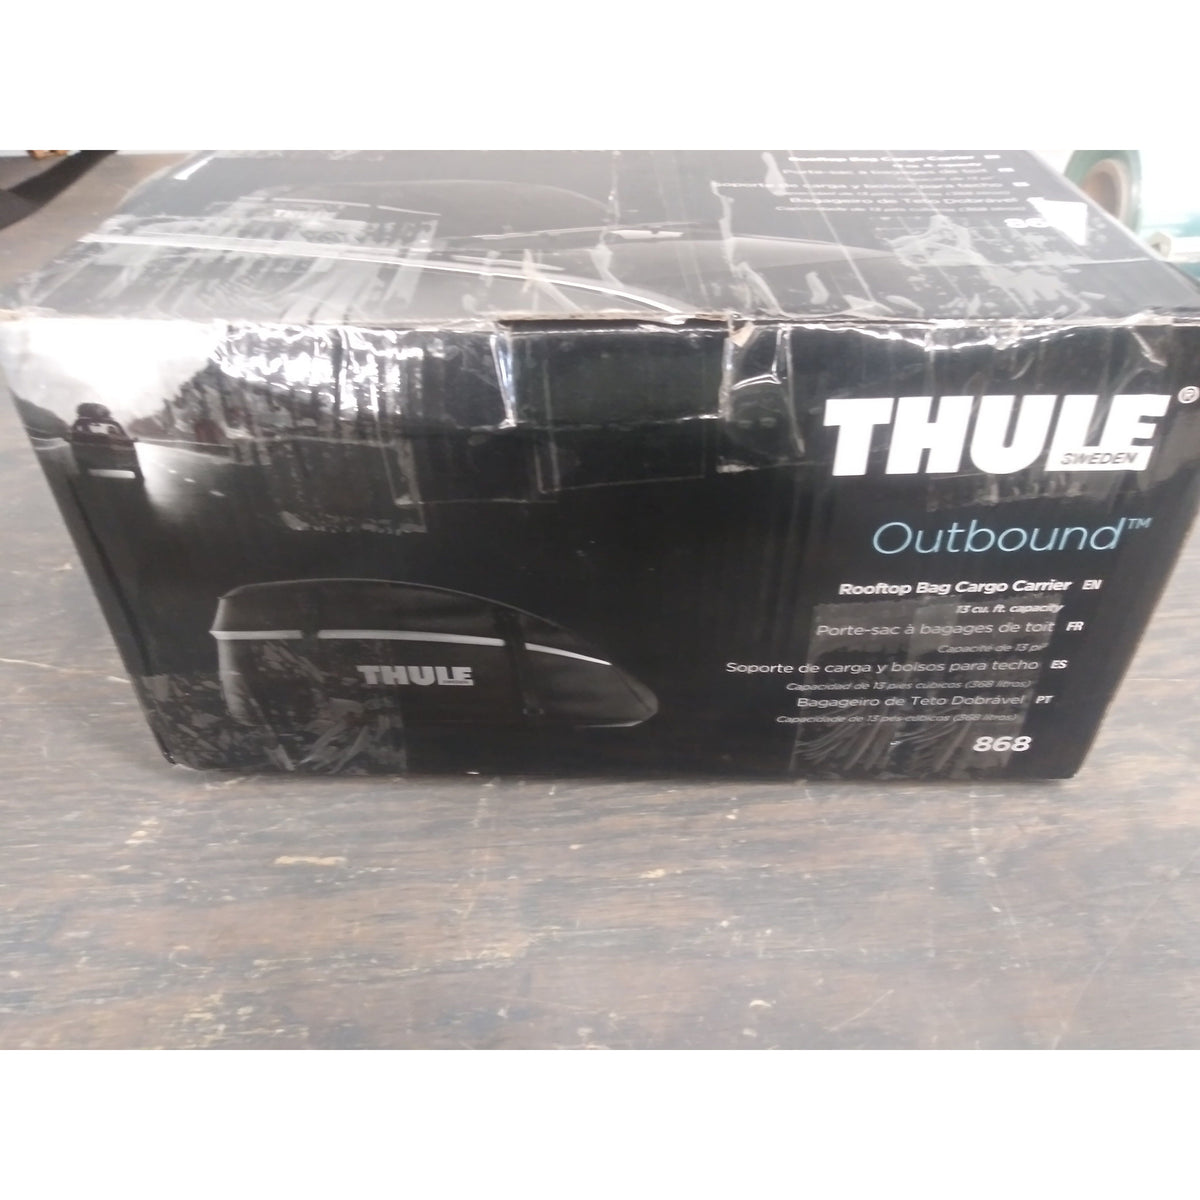 Thule Outbound Cargo Bag - Used - Acceptable